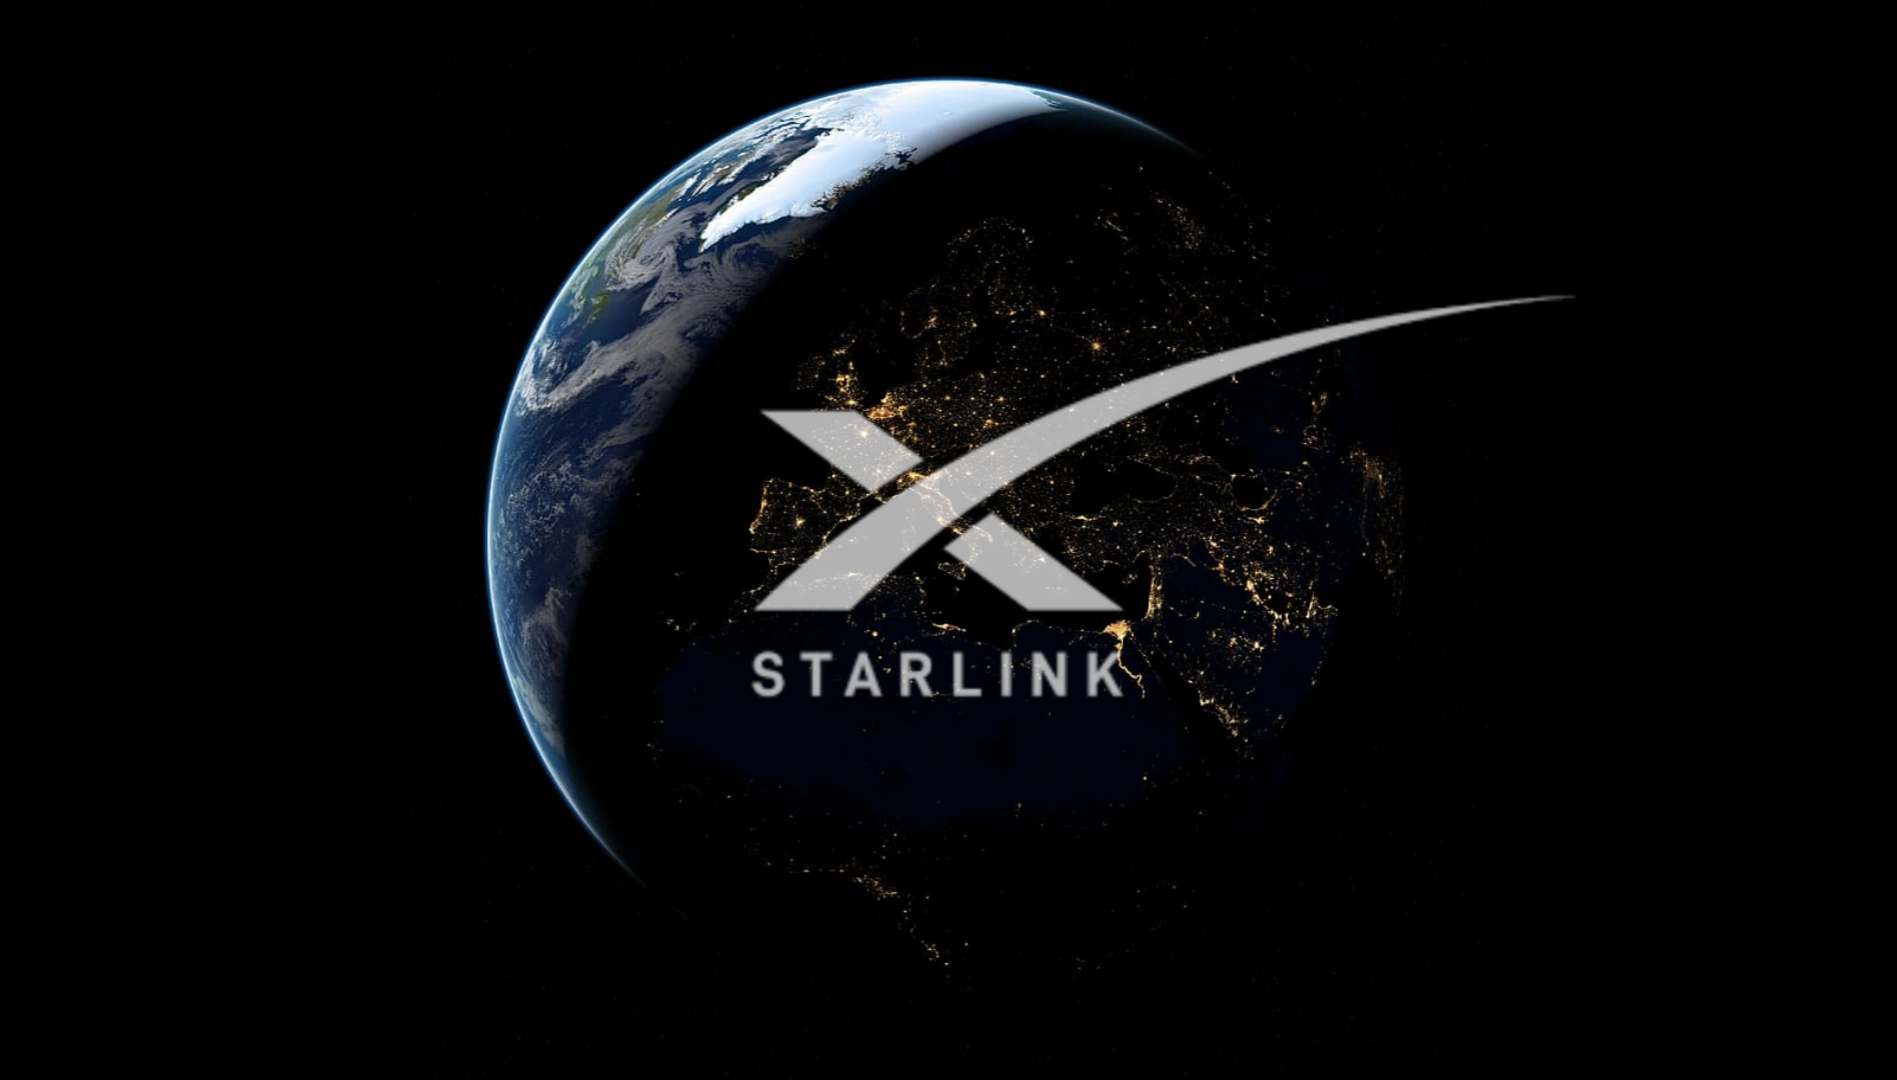 How will the Starlink Satellites position themselves in space?